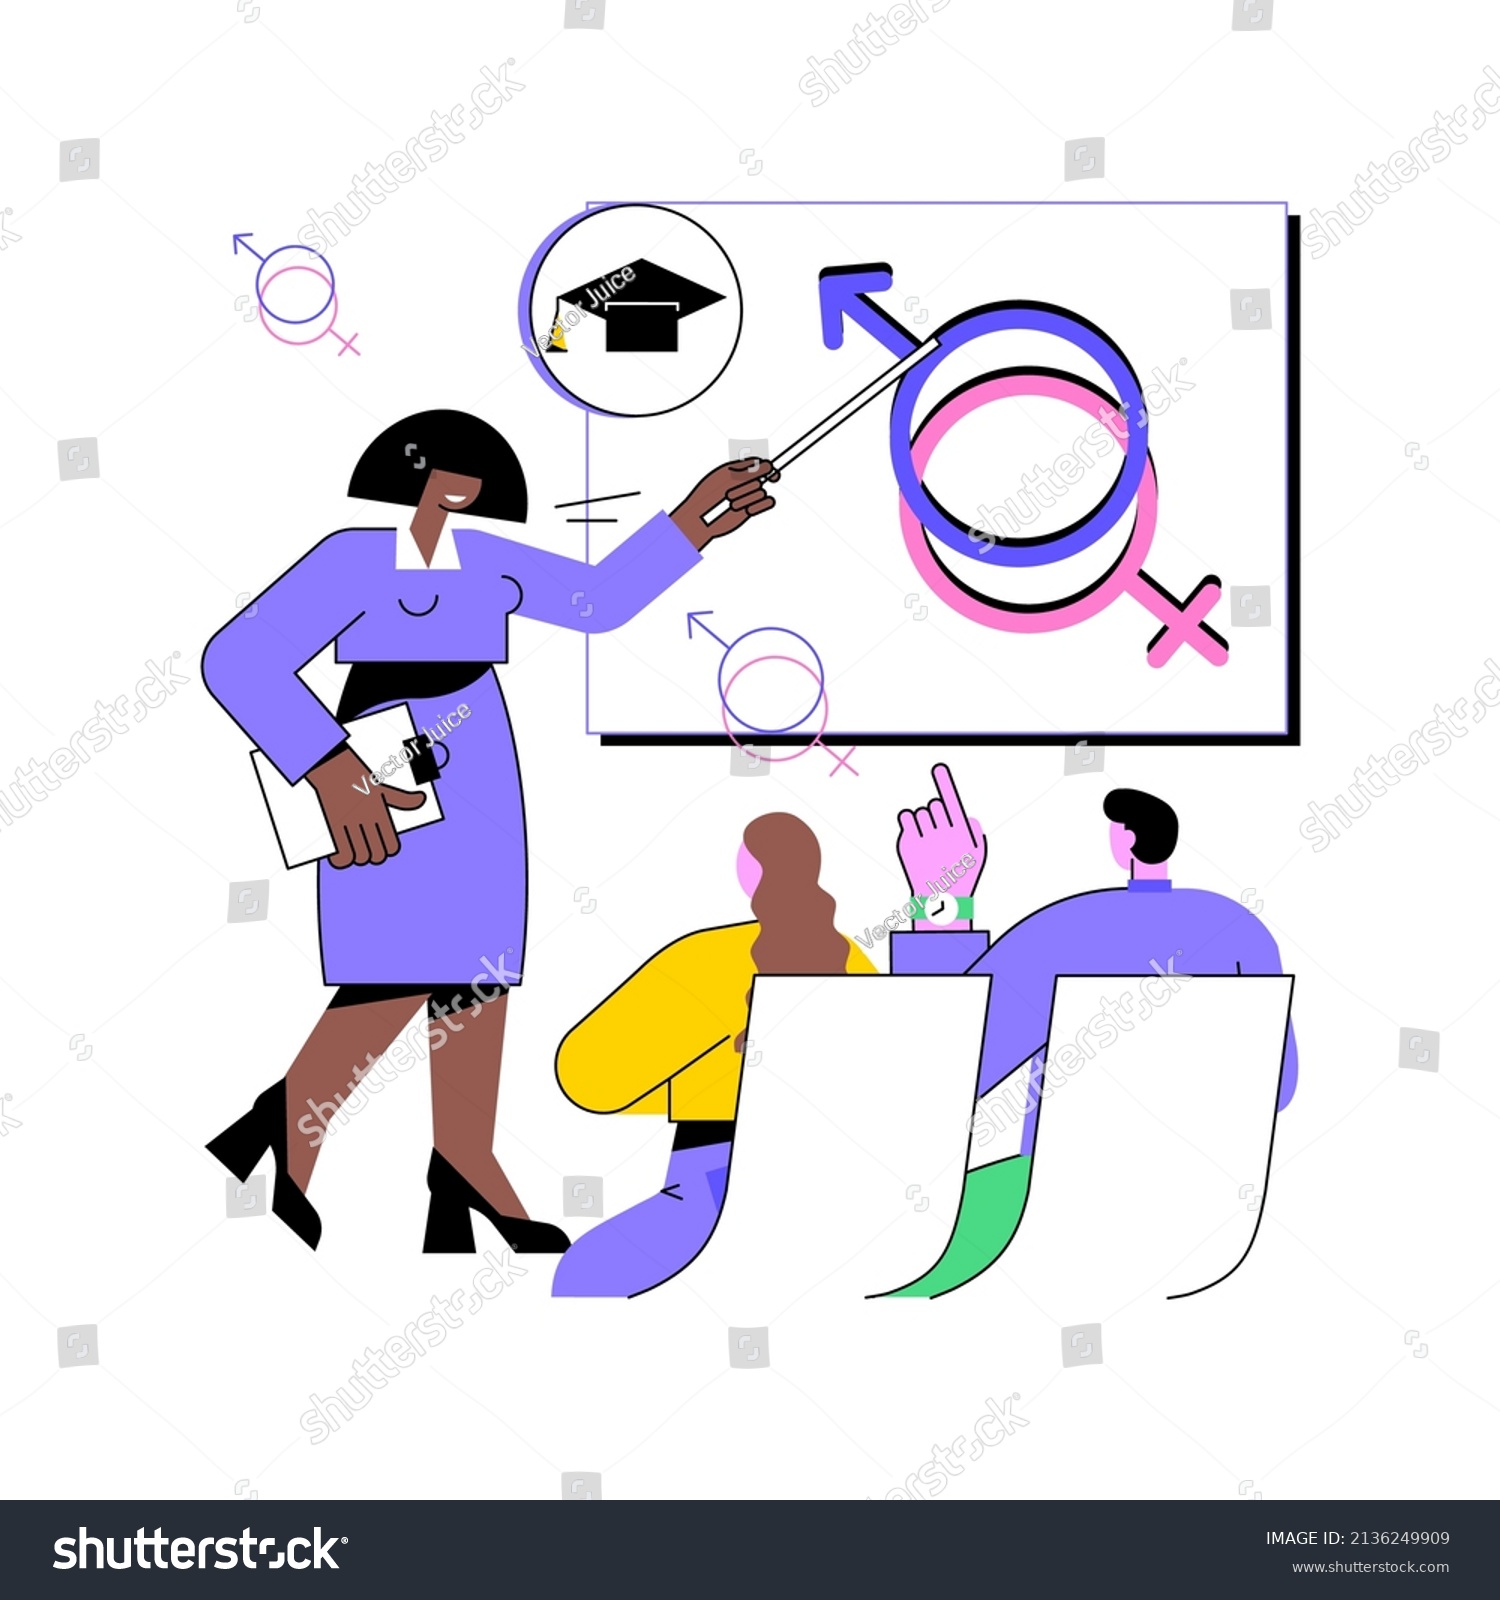 Sexual Education Abstract Concept Vector Illustration Stock Vector Royalty Free 2136249909 1251